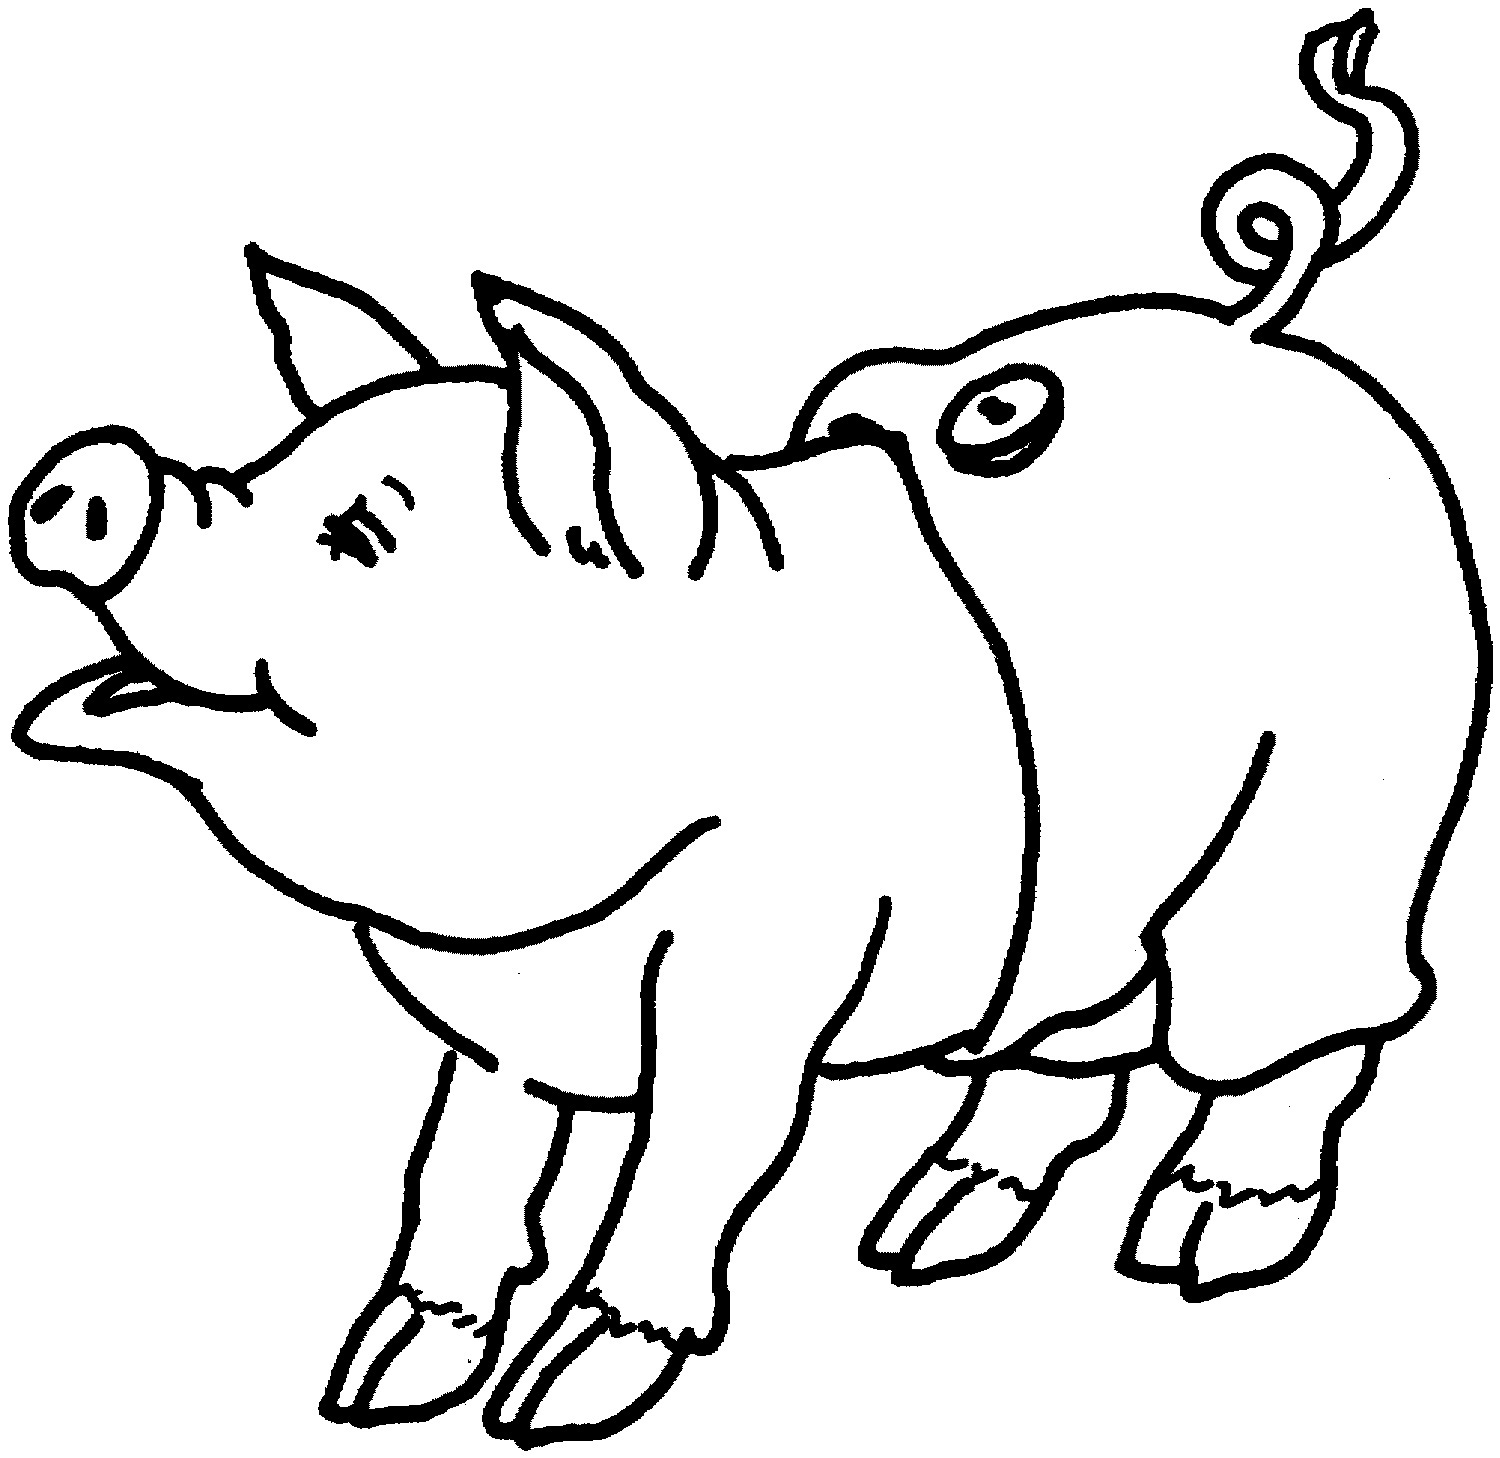 Printable Pig Face Coloring Page - Printable Coloring Pages